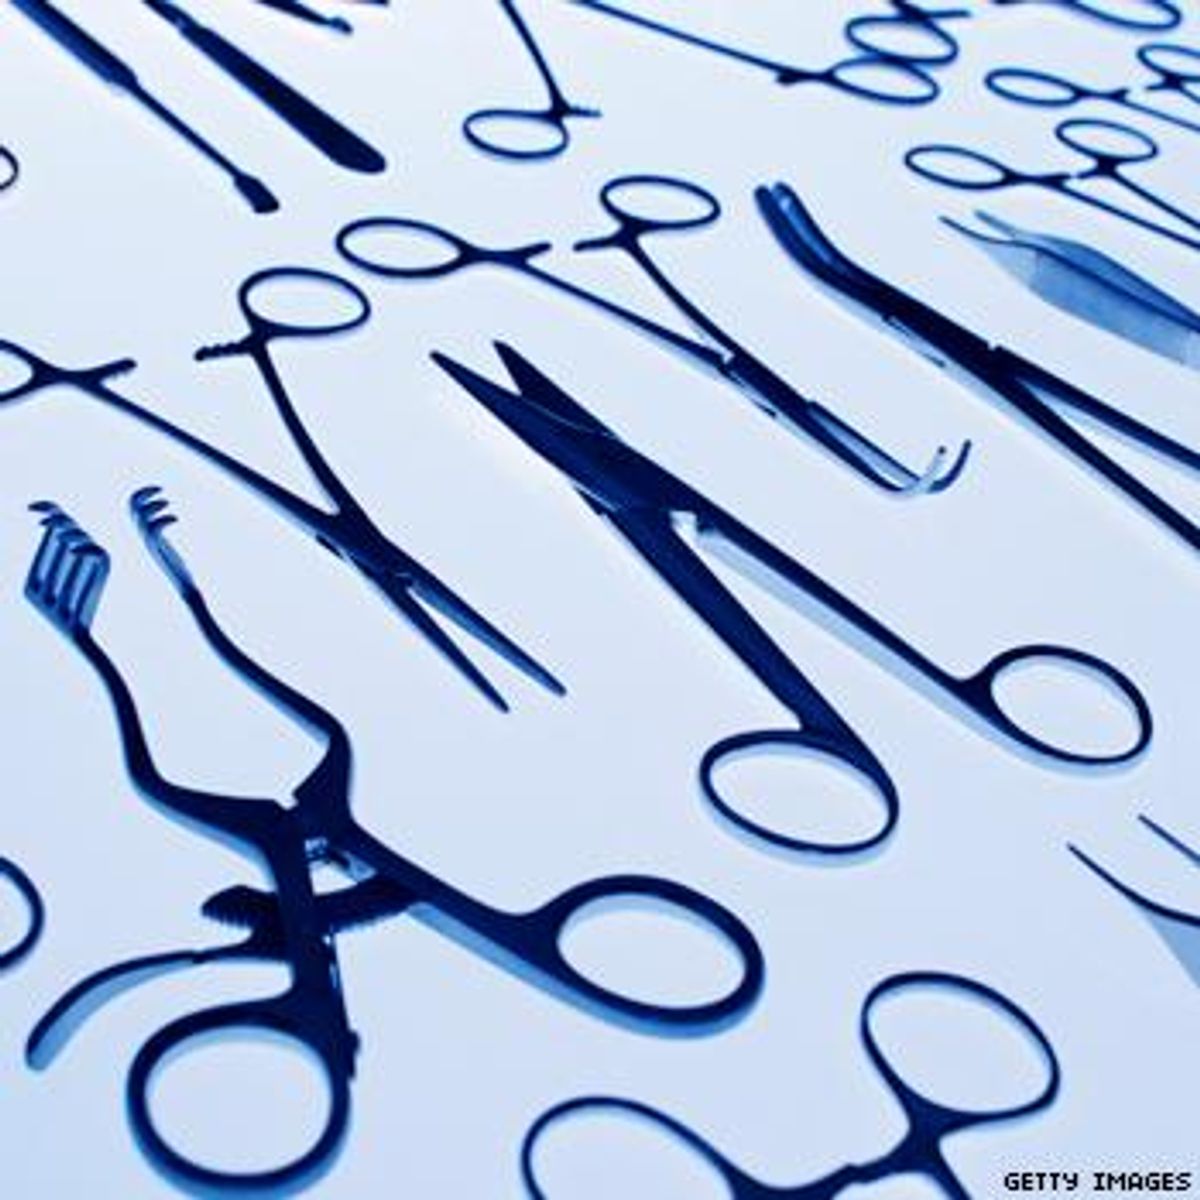 Surgical_tools_0